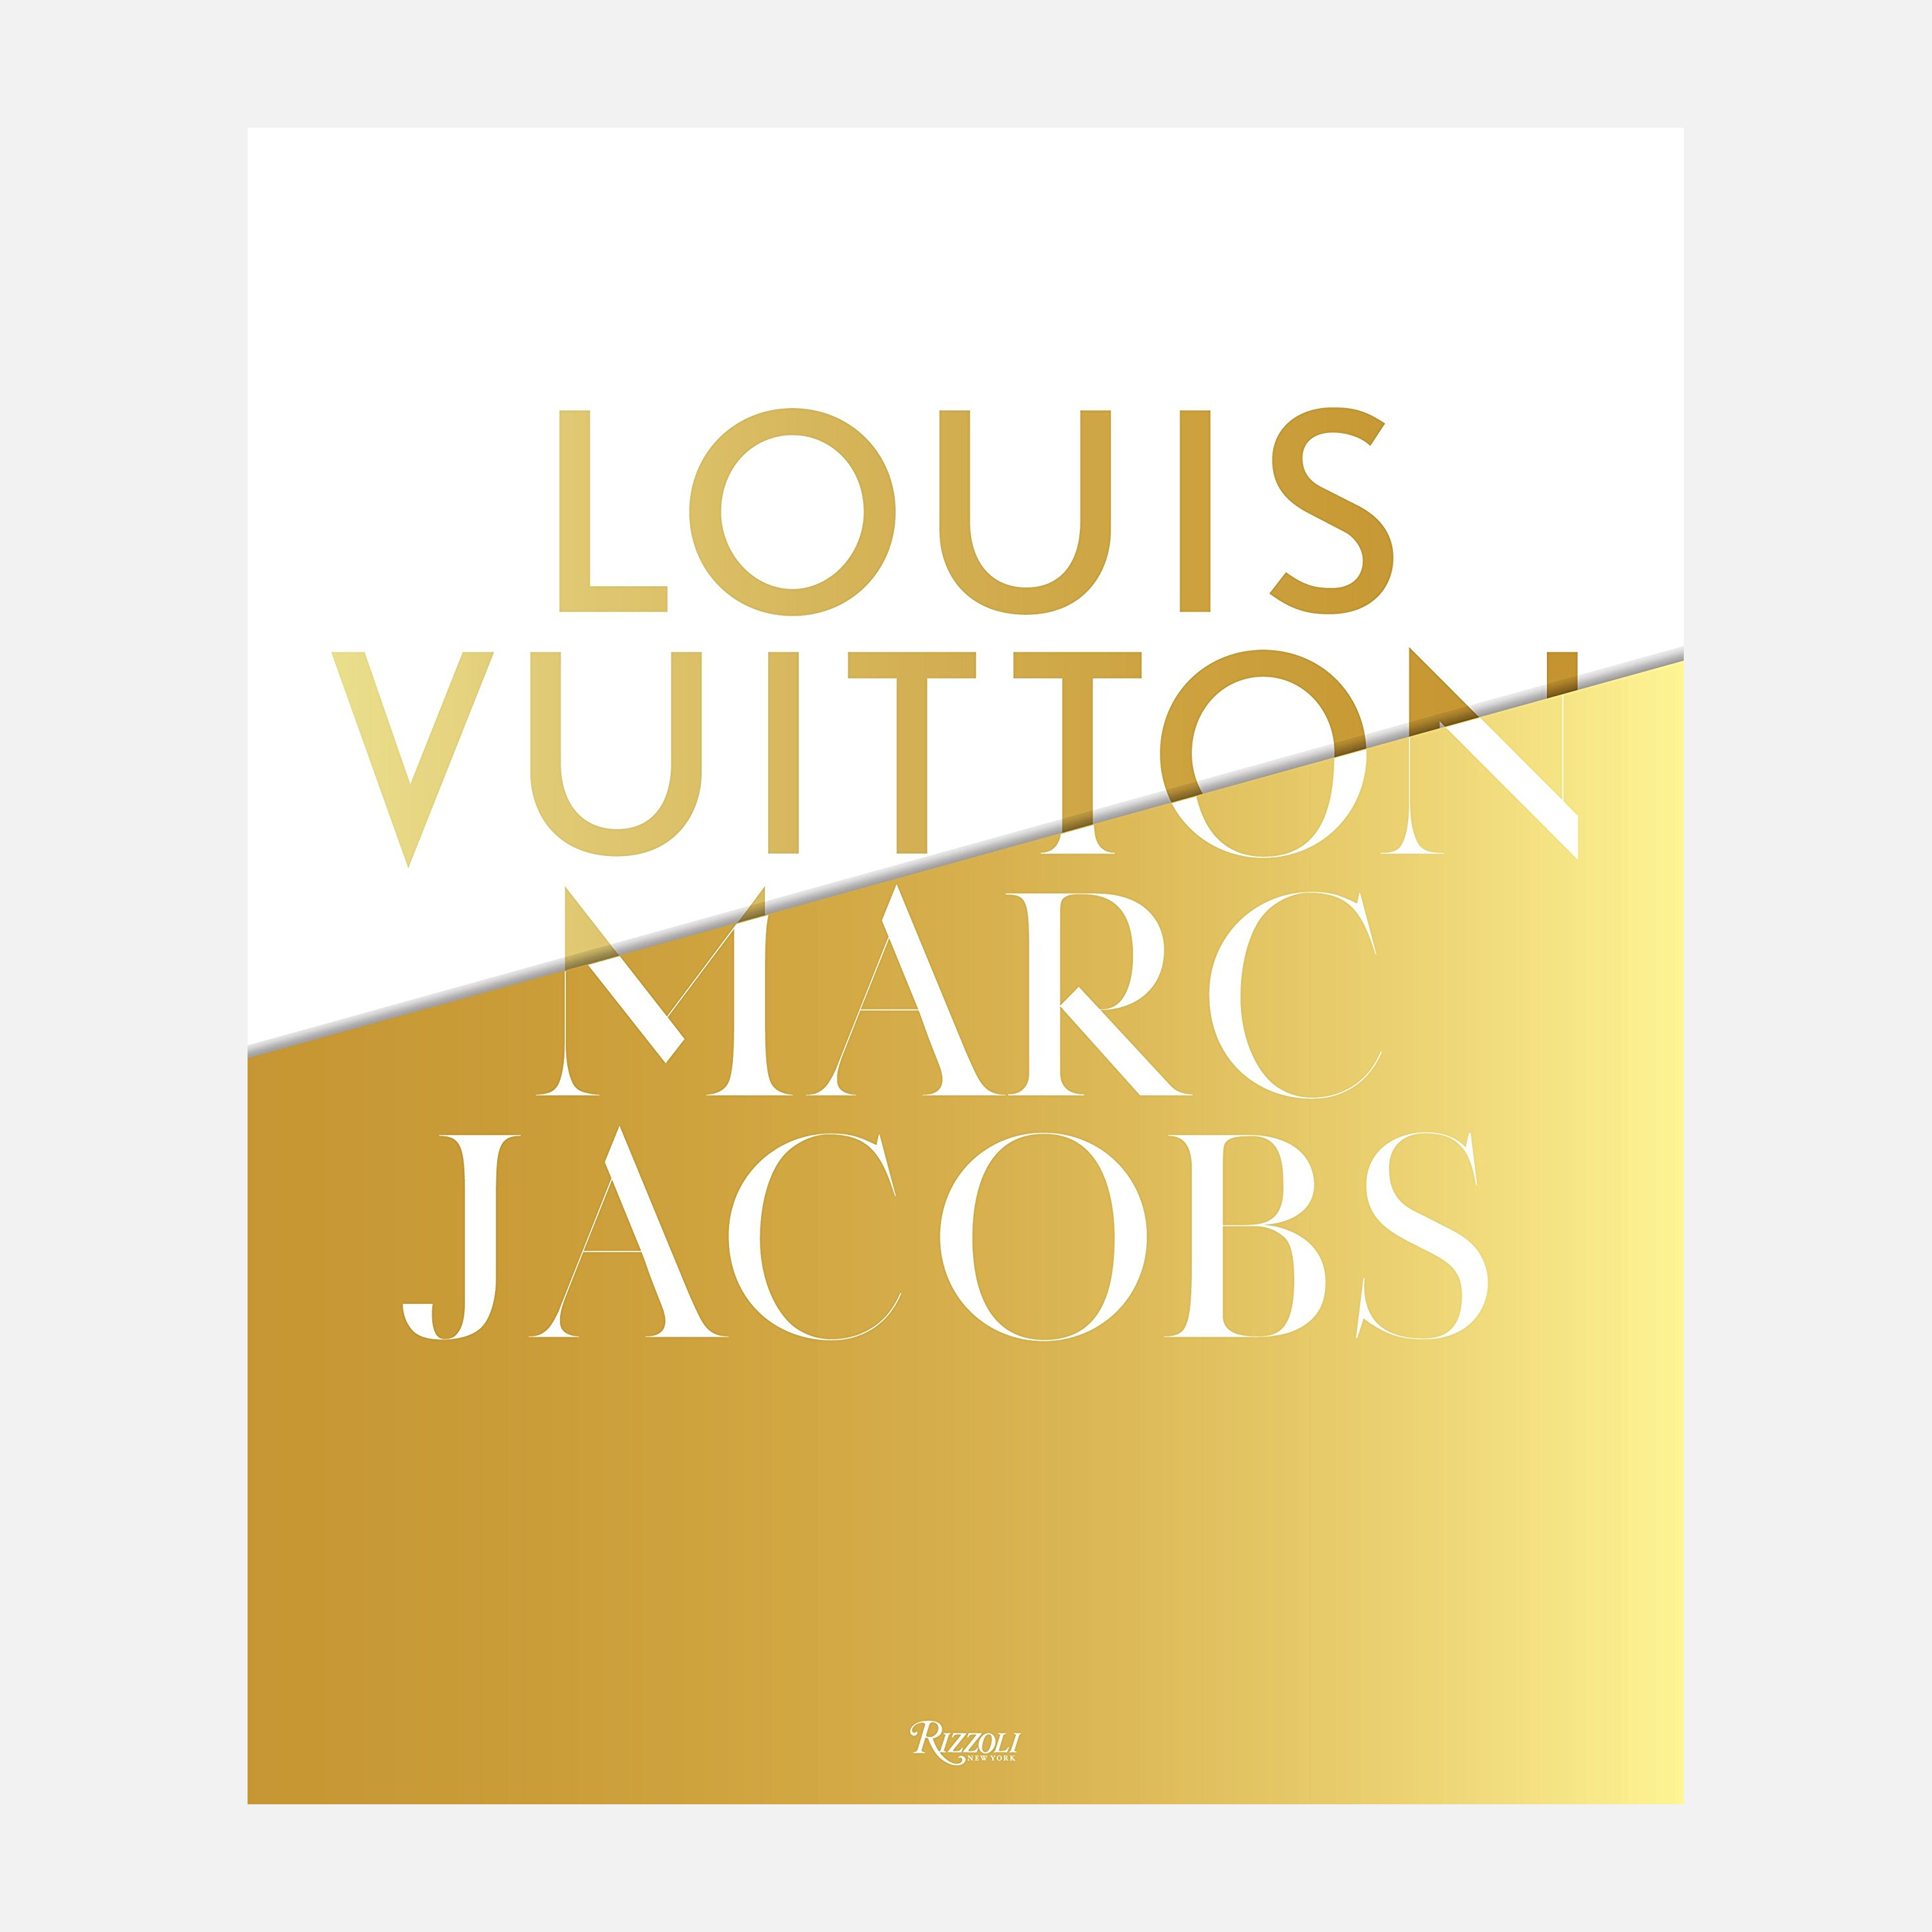 Louis Vuitton: Icons book by Marc Jacobs